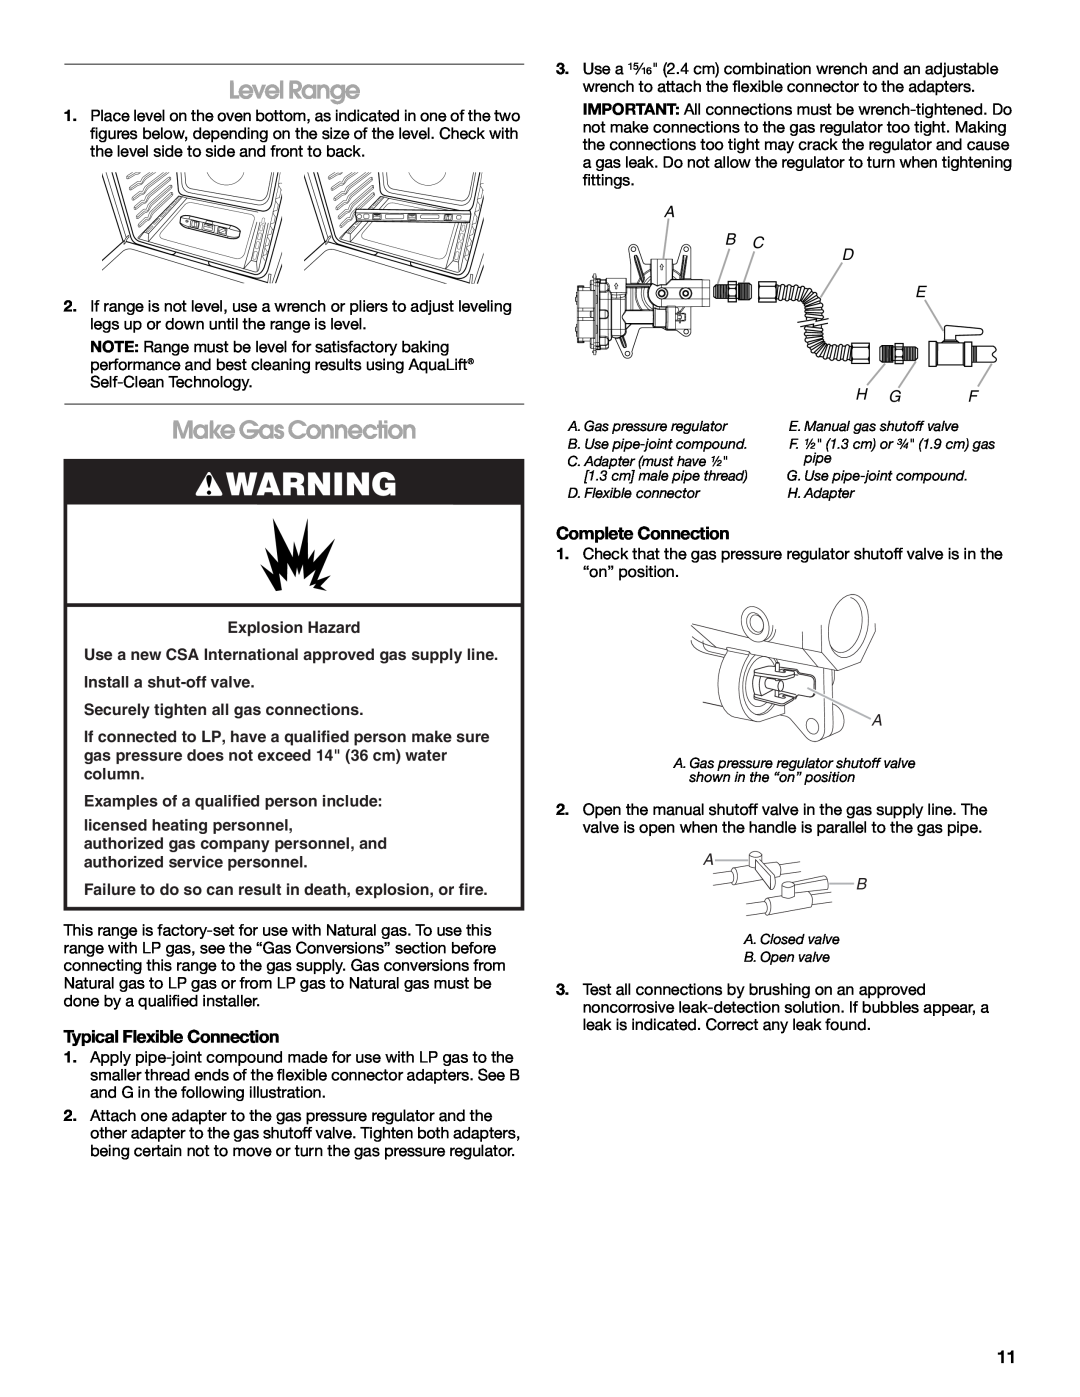 Whirlpool W10665256D Level Range, Make Gas Connection, Typical Flexible Connection, Complete Connection, A B C D E 